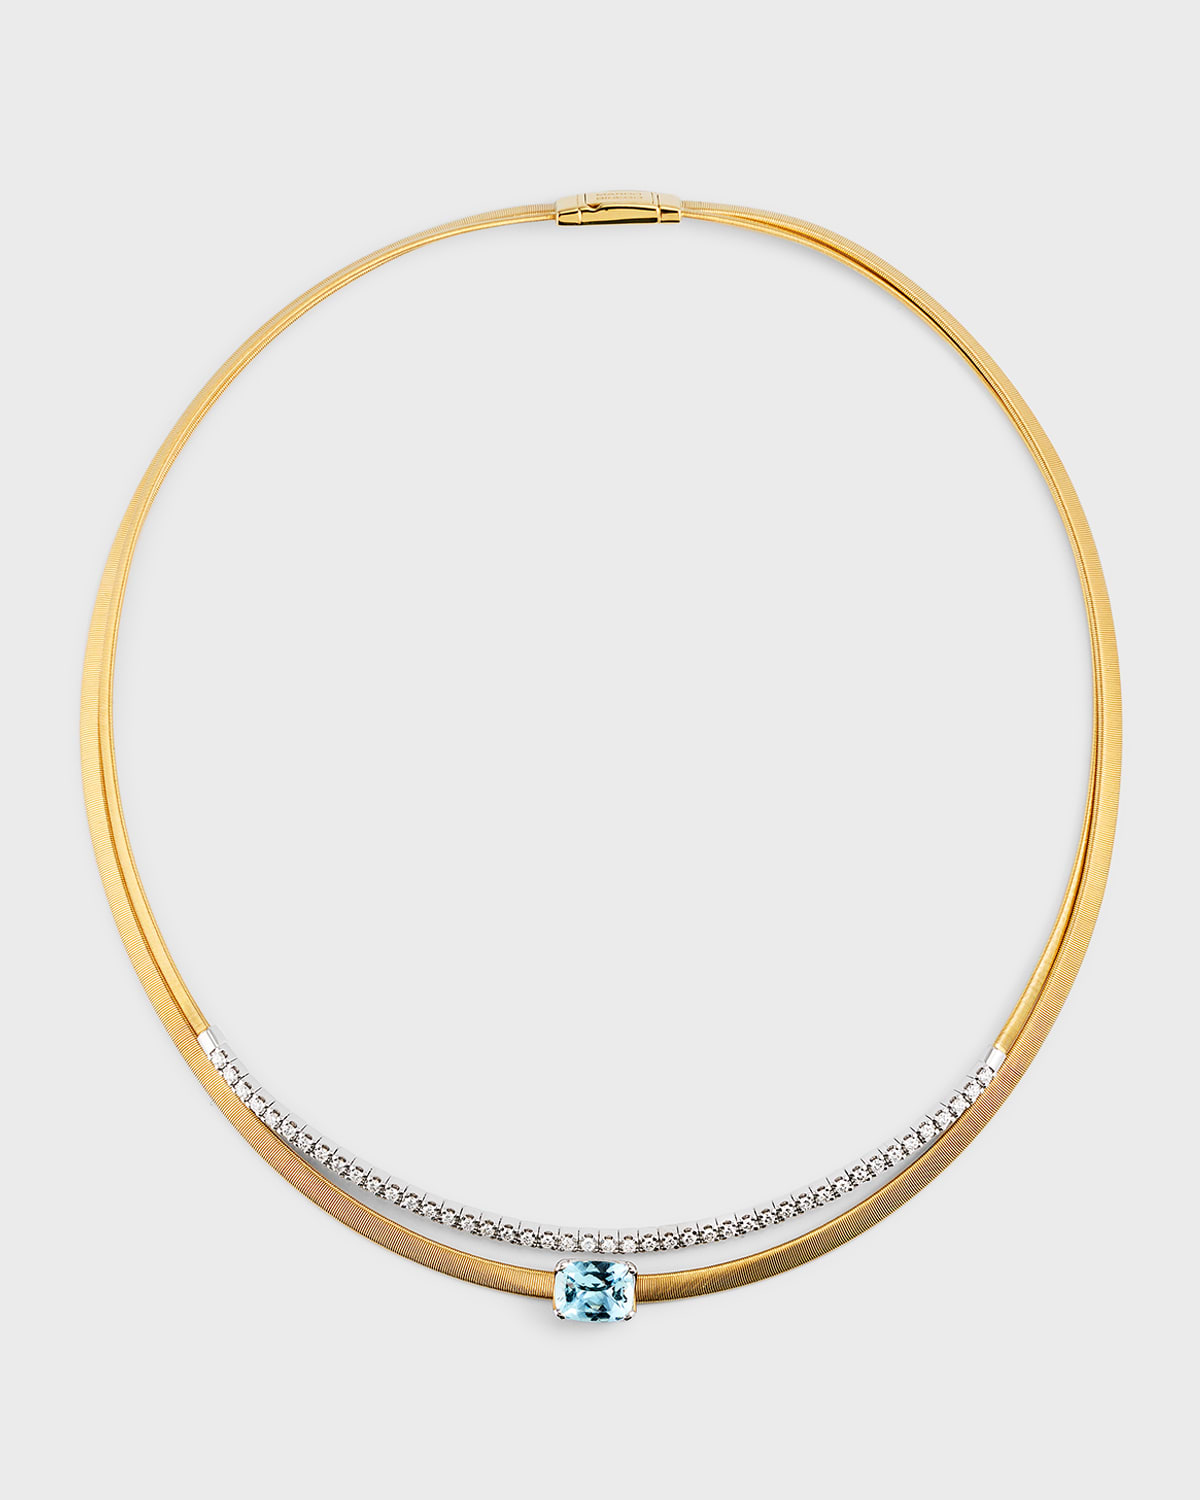 Marco Bicego 18k Masai Yellow Gold Necklace With Diamonds And Aquamarine